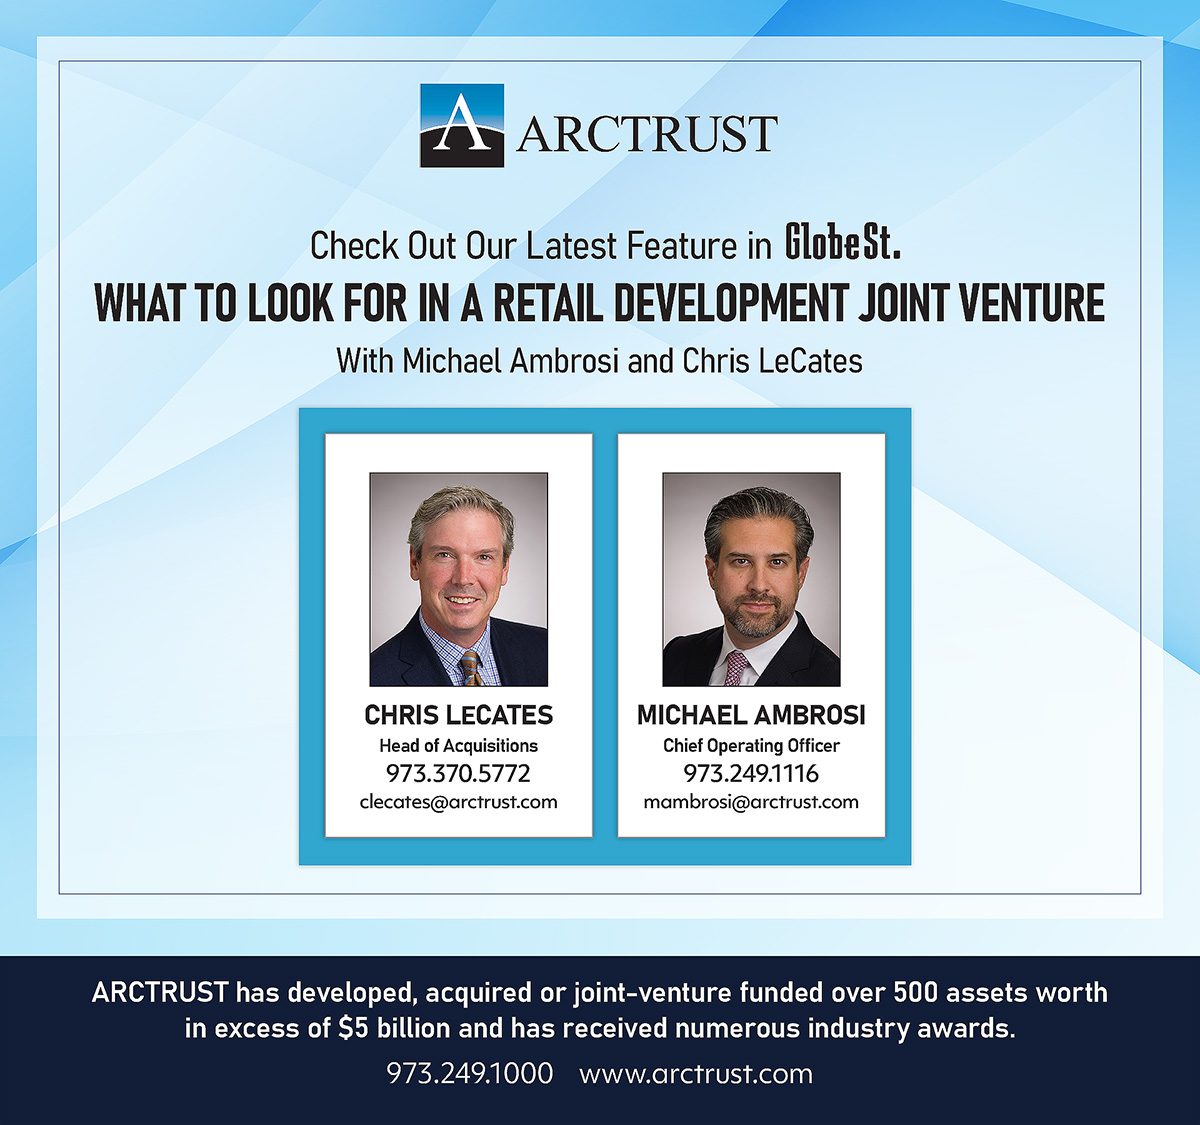 Check out ARCTRUST's latest Globe St. Feature, 'What to Look for in a Retail Development Joint Venture!' …lDevelopmentJointVenture.arctrust.com

@ARCTRUST1 #ARCTRUST #globestreet #realestate #commercialrealestate #cre #jvdevelopment #developmentfinance #investmentproperties #NetLease #NNN #stnl